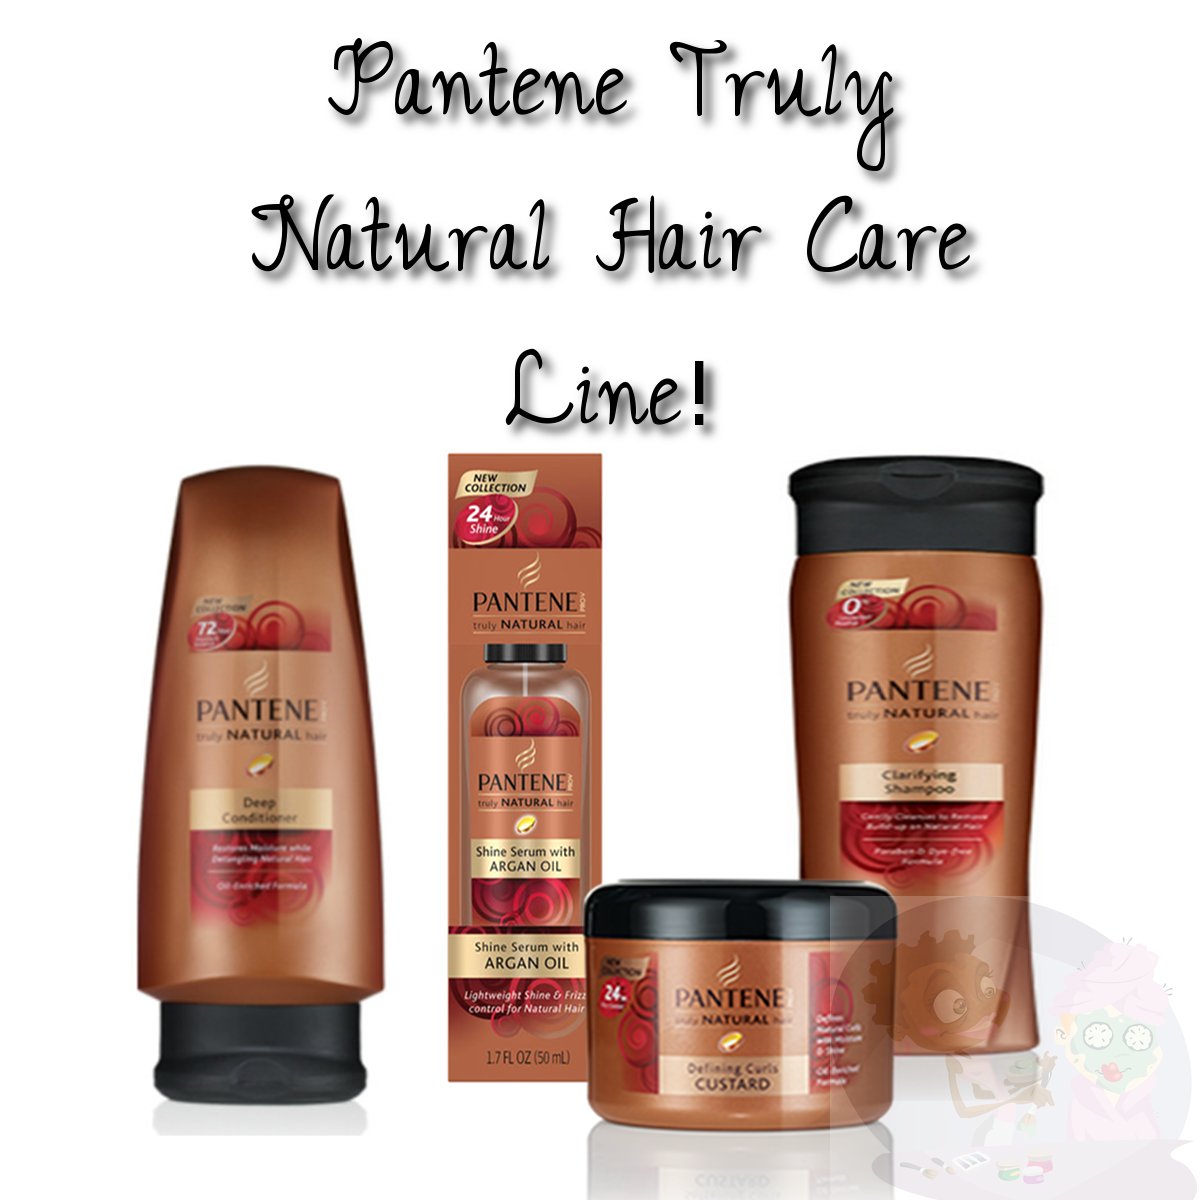 Pantene Truly Natural Hair Care Line Wwwbeingmelodycom